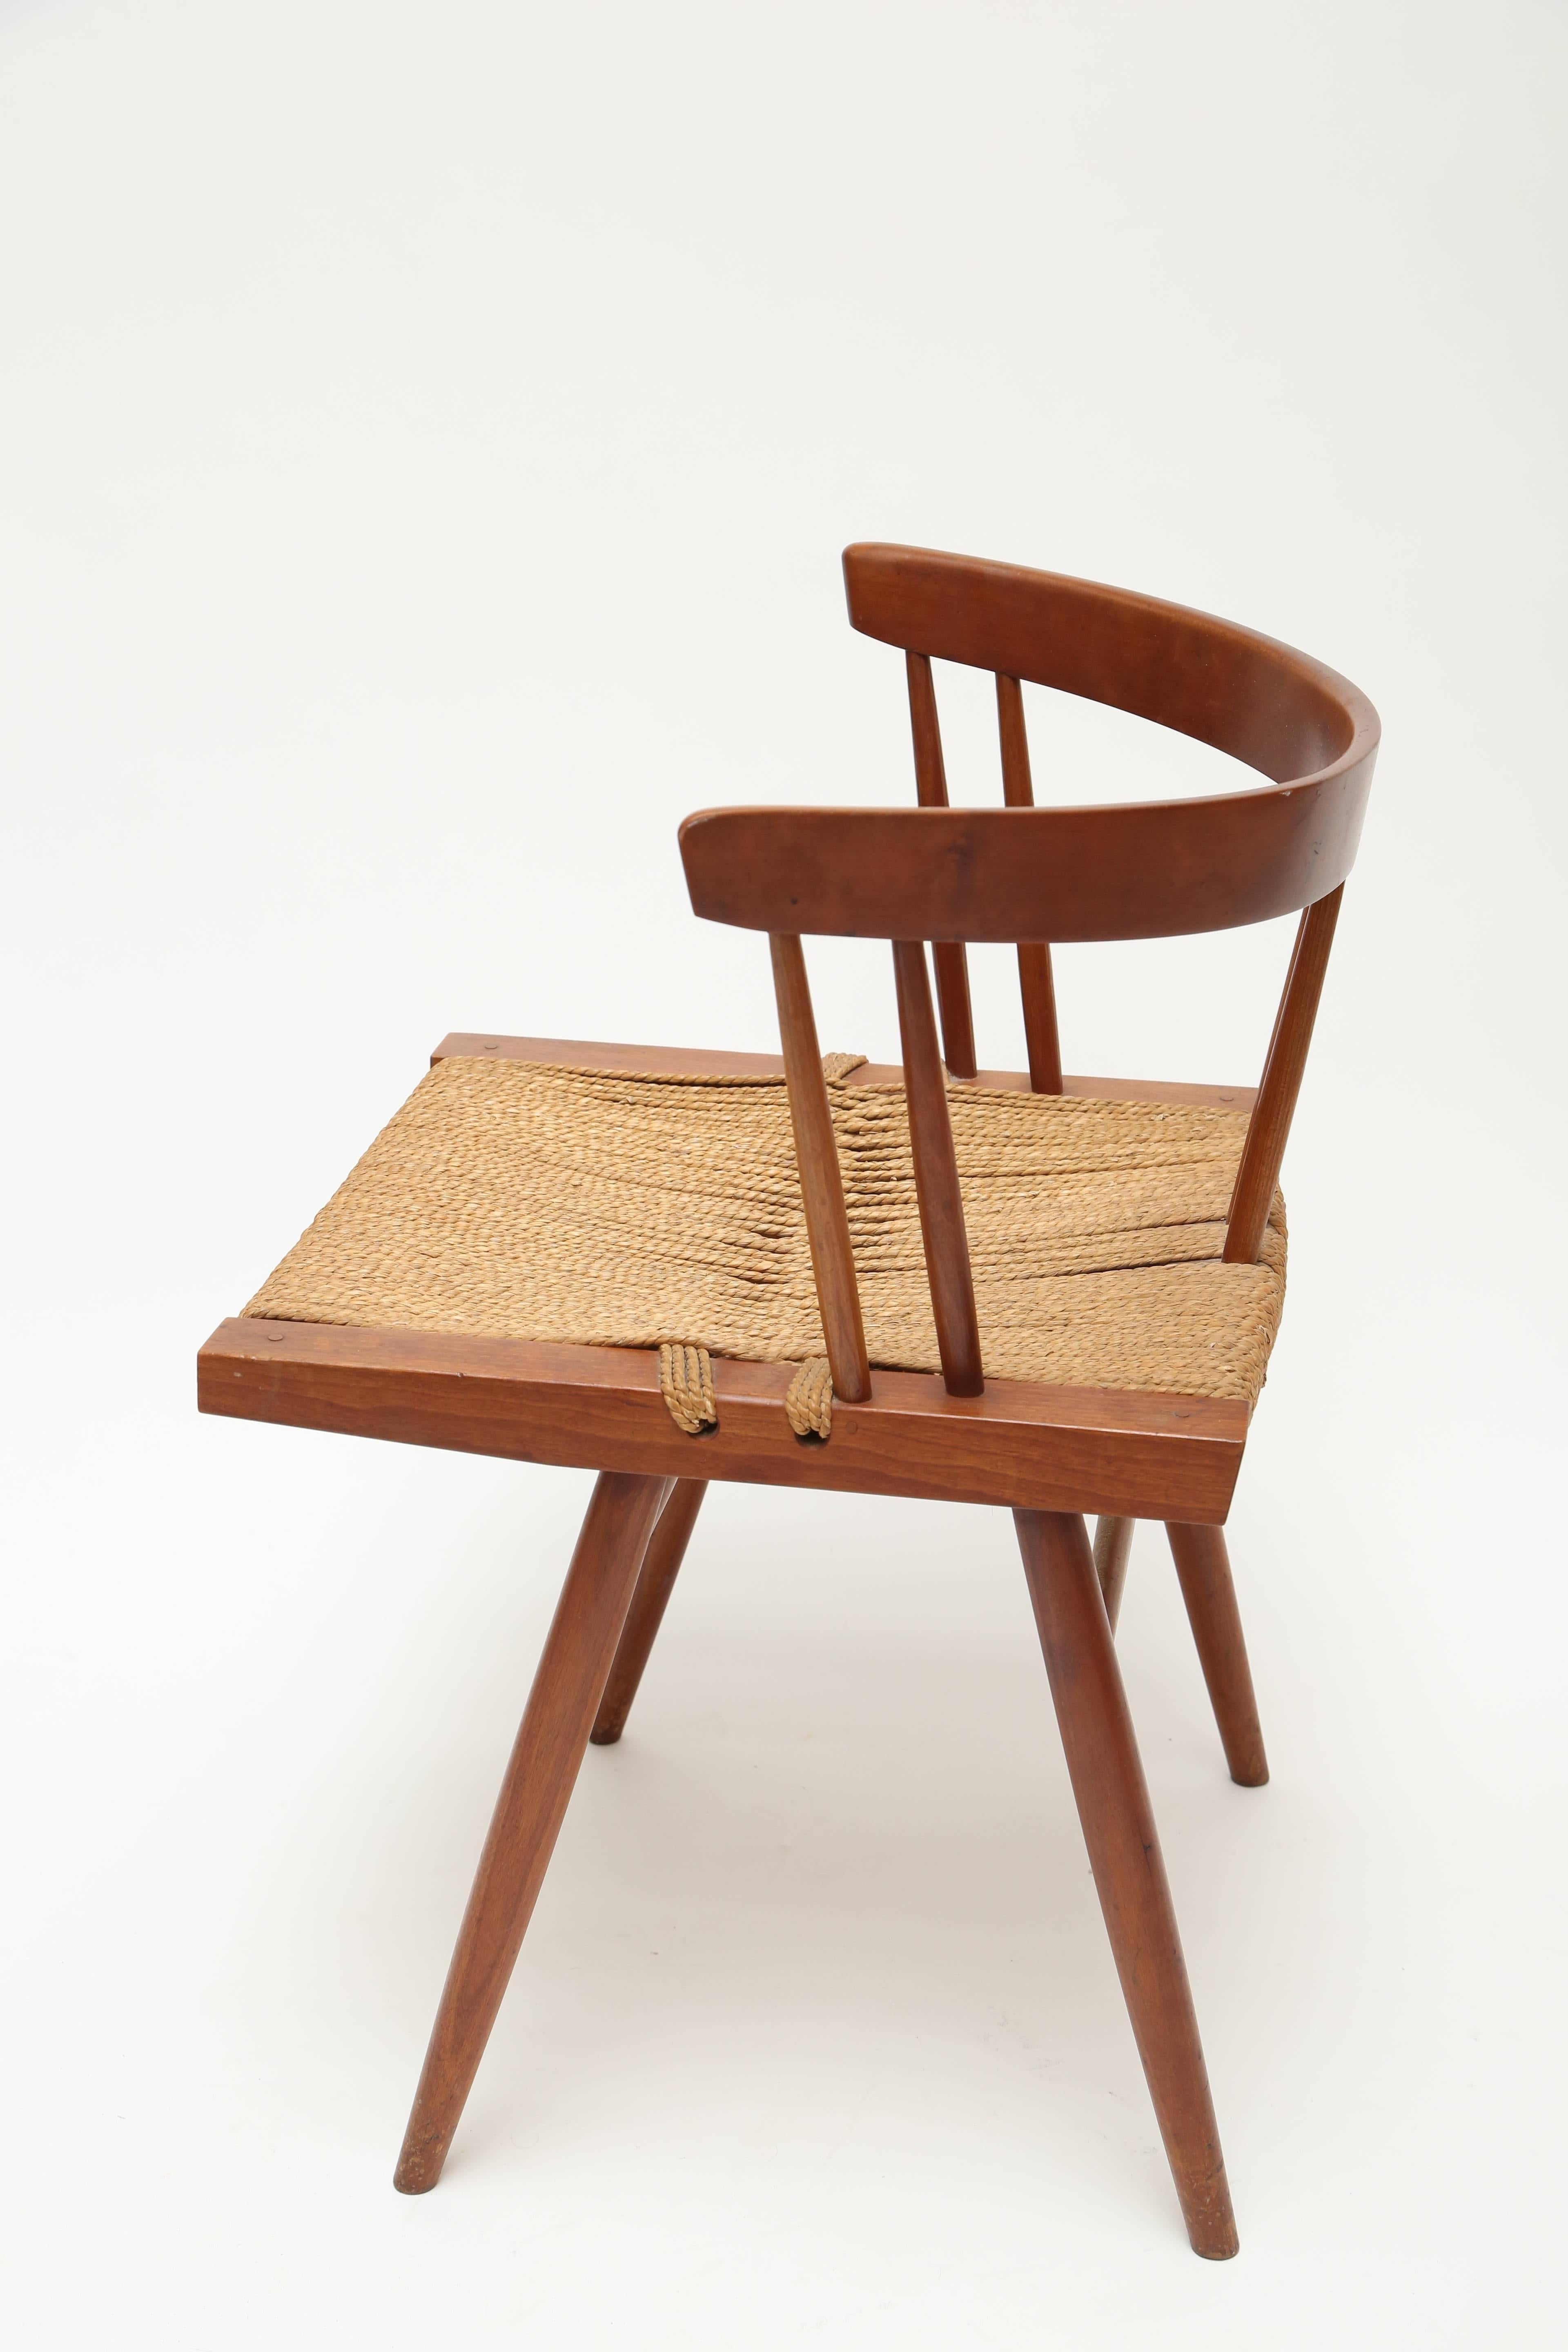 An early set of four grass seat chairs by George Nakashima
Set of four chairs.